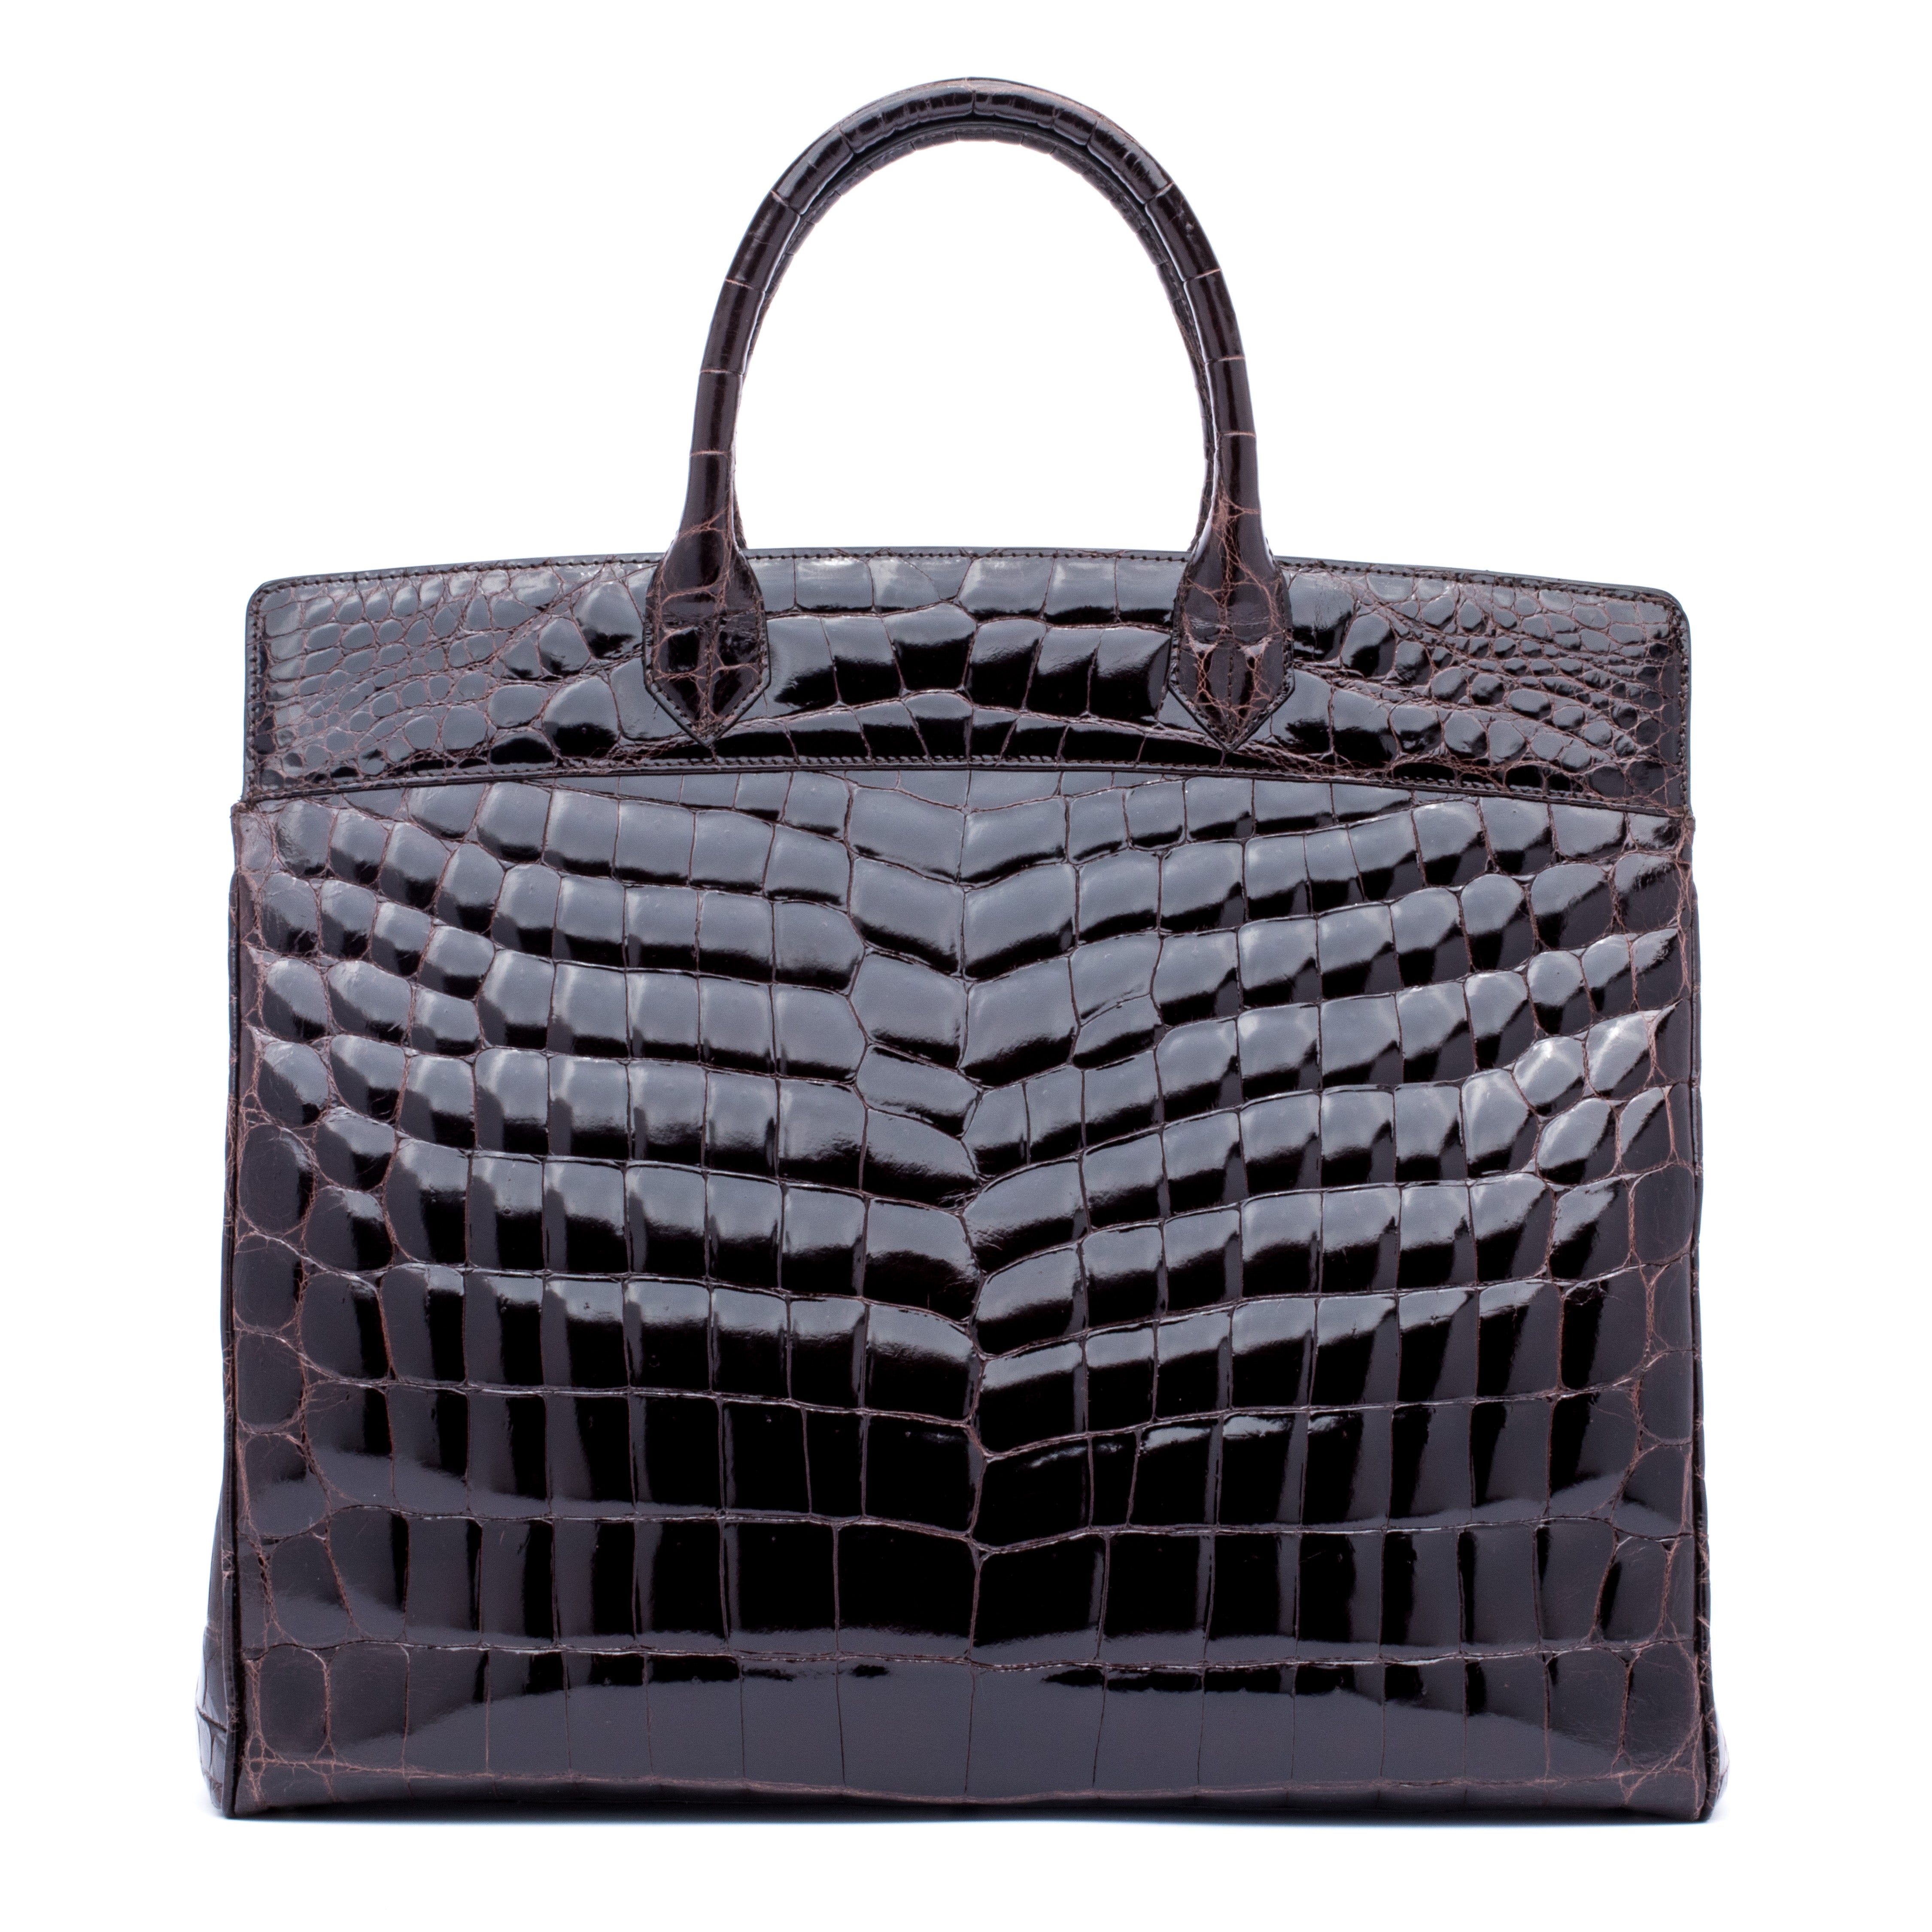 Executive Tote in Brown